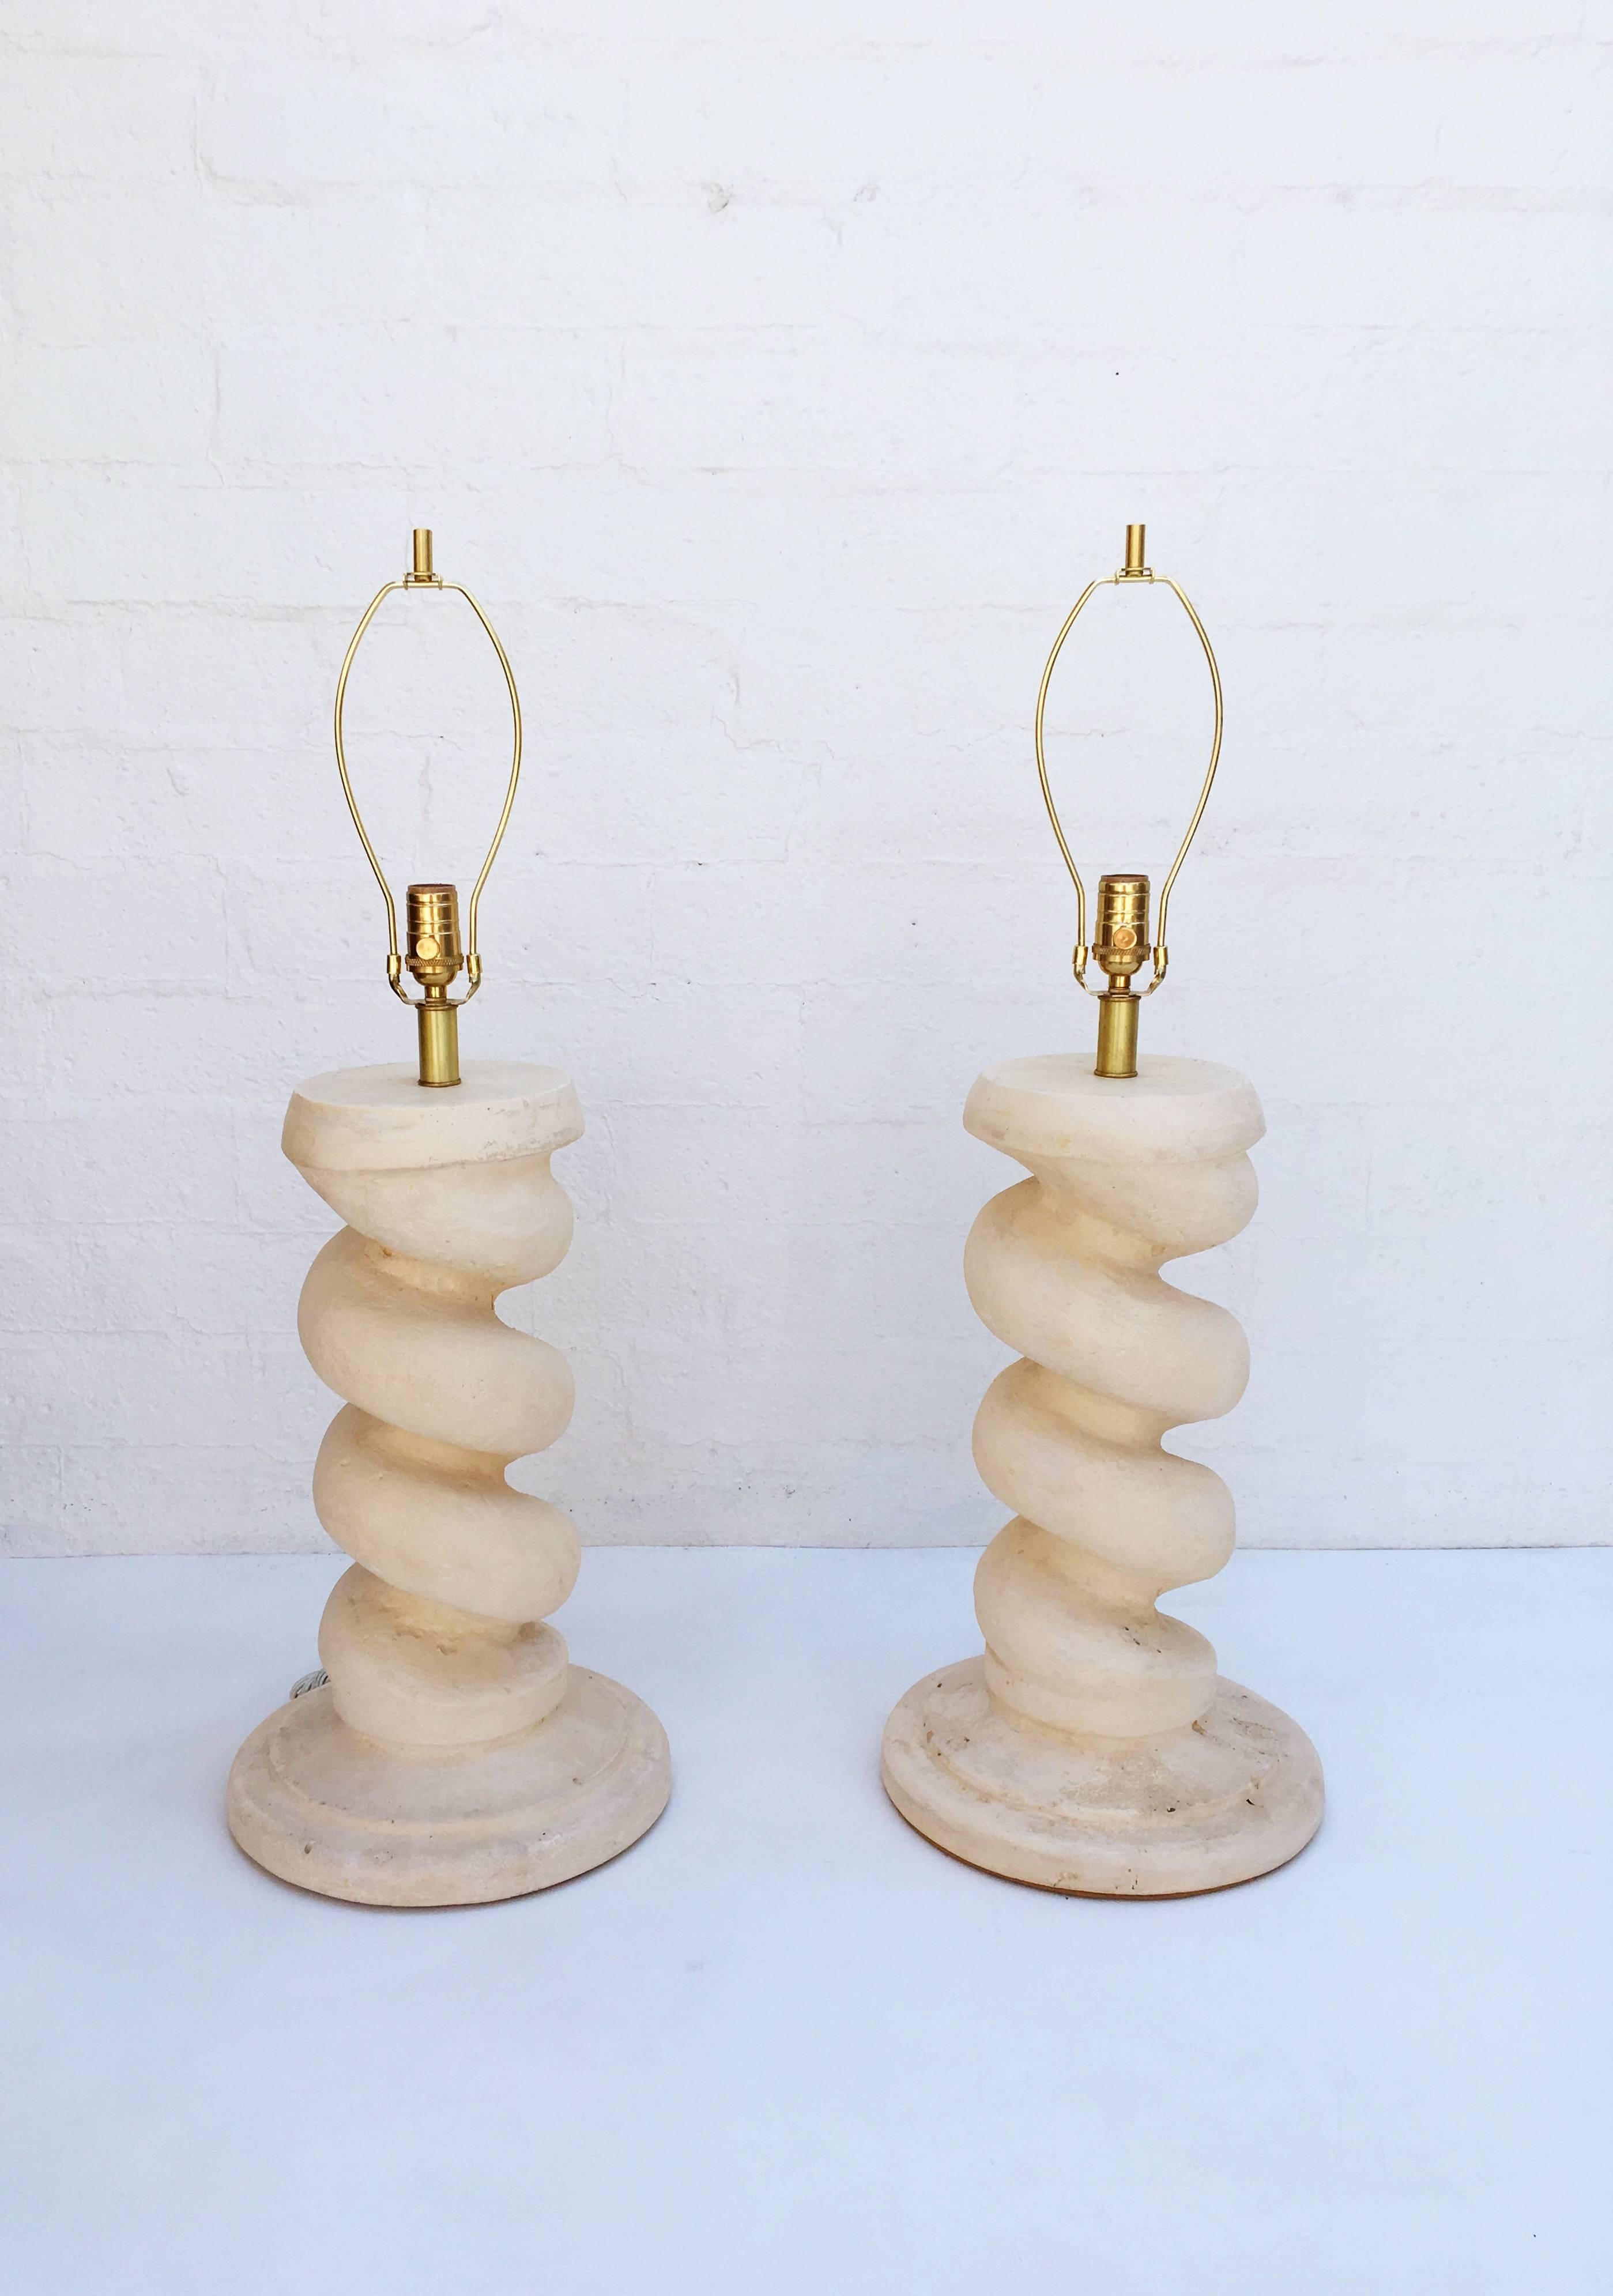 Modern Pair of Plaster Spiral Column Lamps by Michael Taylor